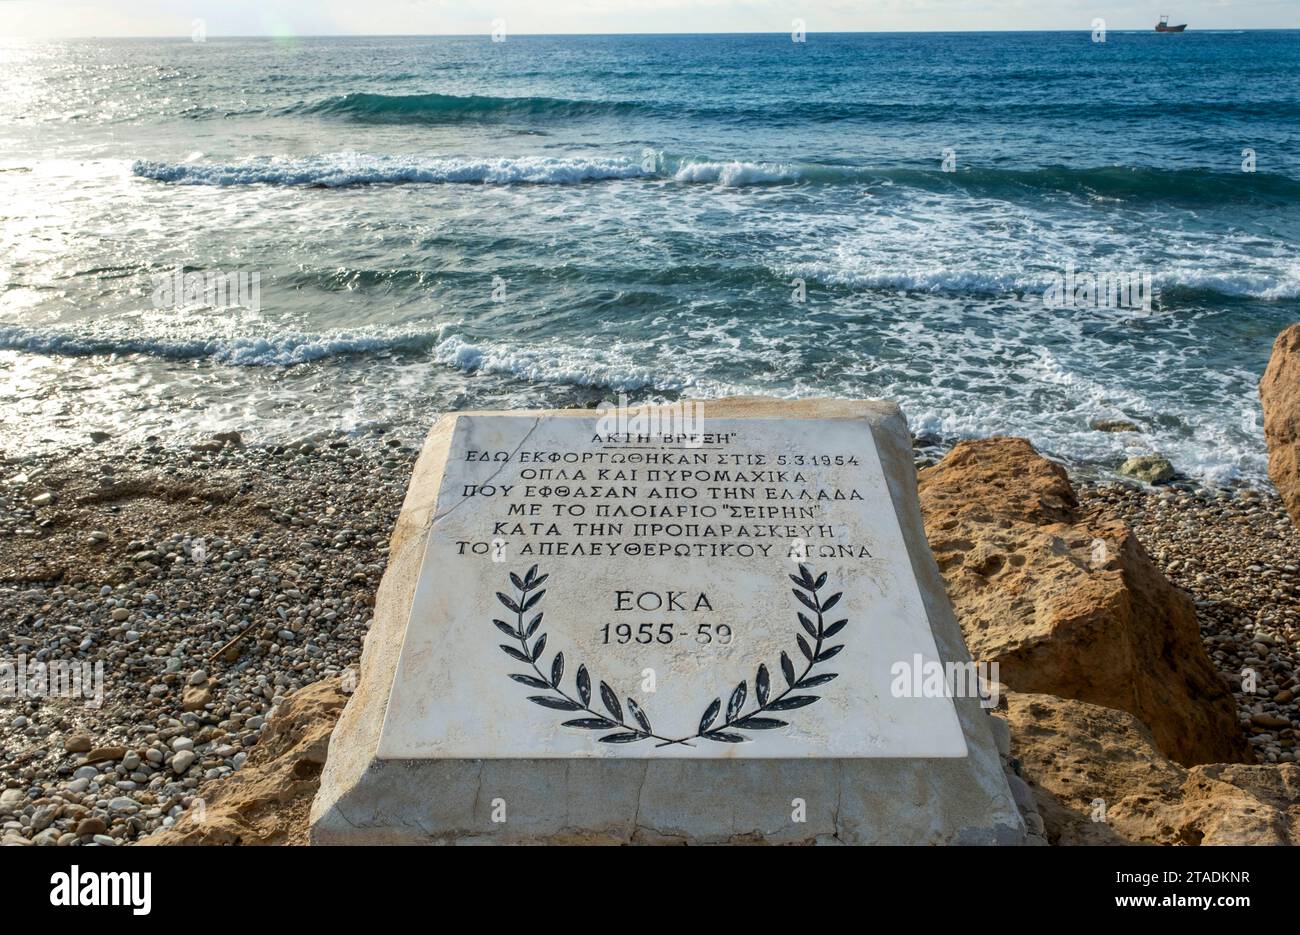 Inscription on a stone plaque in memory and honour of the EOKA struggle 1955-1959. Chlorakas, Paphos, Cyprus. Stock Photo